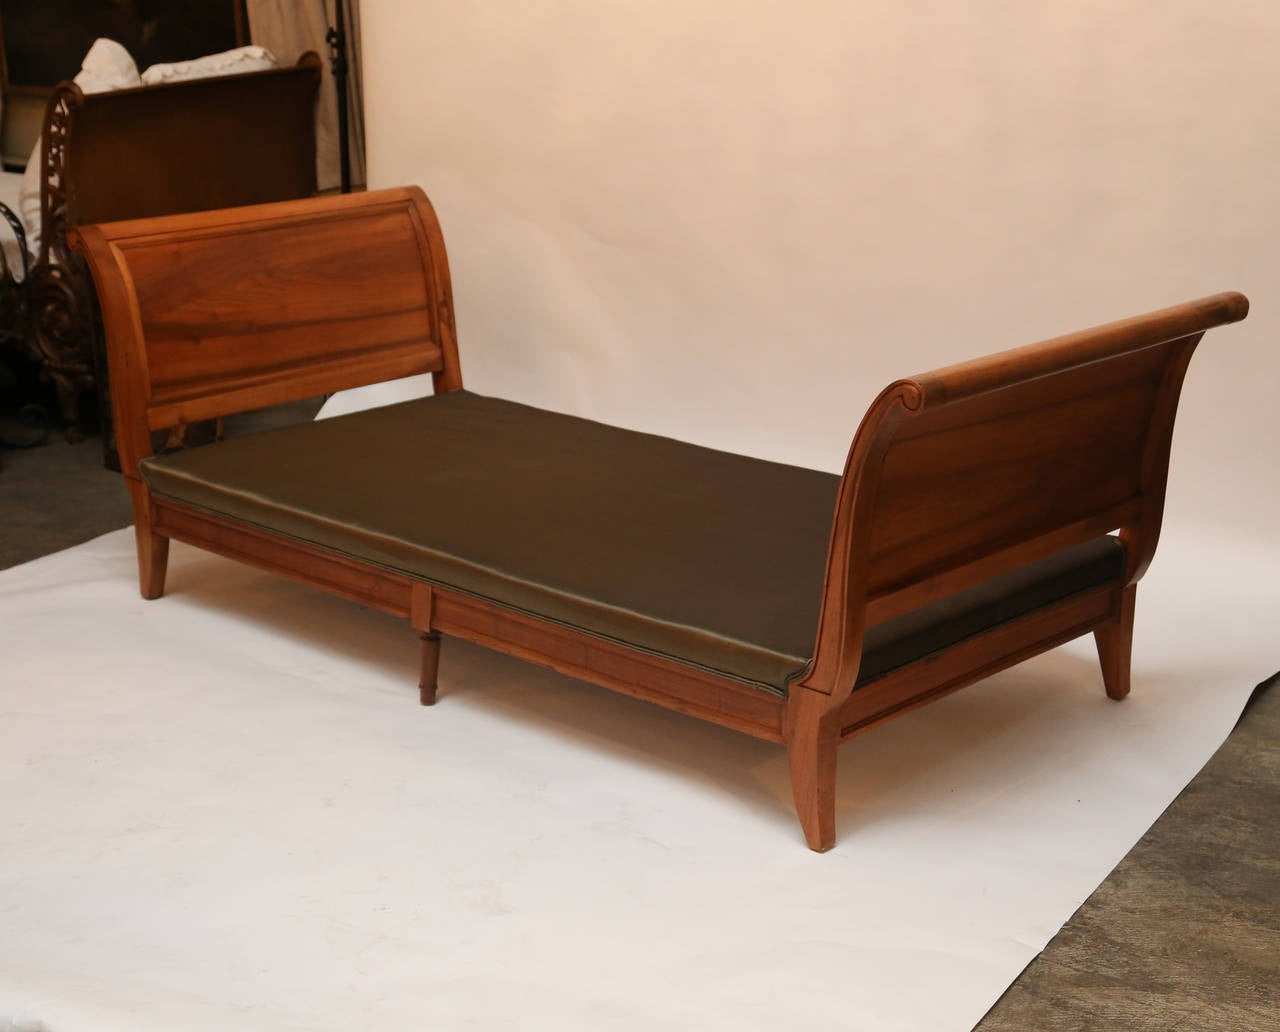 Two walnut sleigh-style daybeds, close to size of twin beds.

Finish is a medium walnut, almost a fruitwood.

Ends are pitched and paneled and legs are splayed.

New mattresses and bolsters are included. 

Remarkable pair, elegant in their